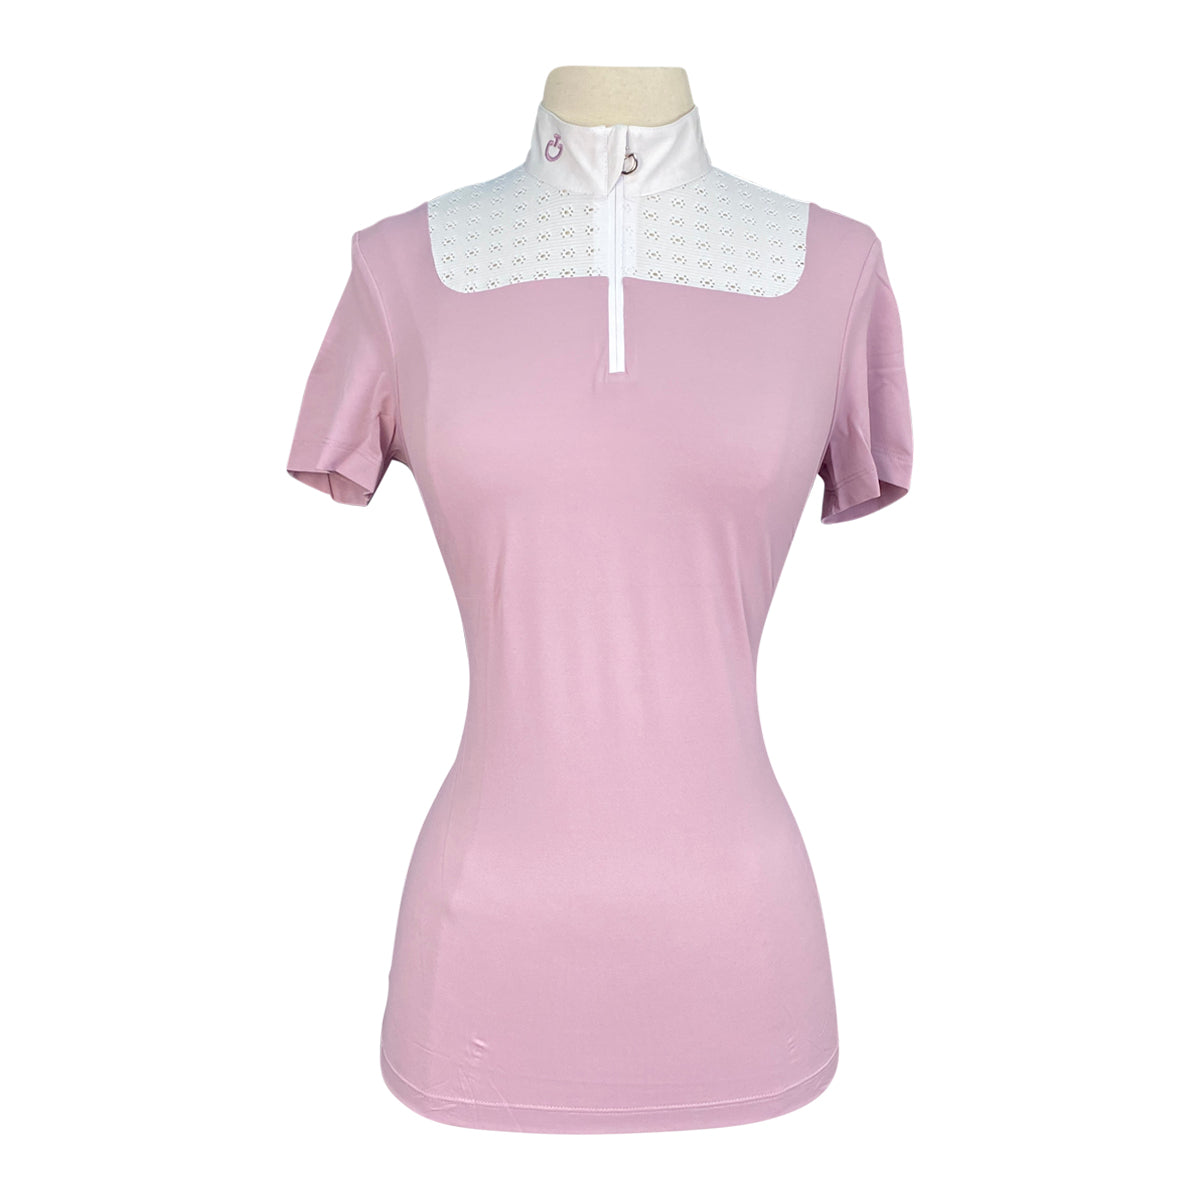 Cavalleria Toscana S/S Zip Competition Polo in Pale Mauve/White